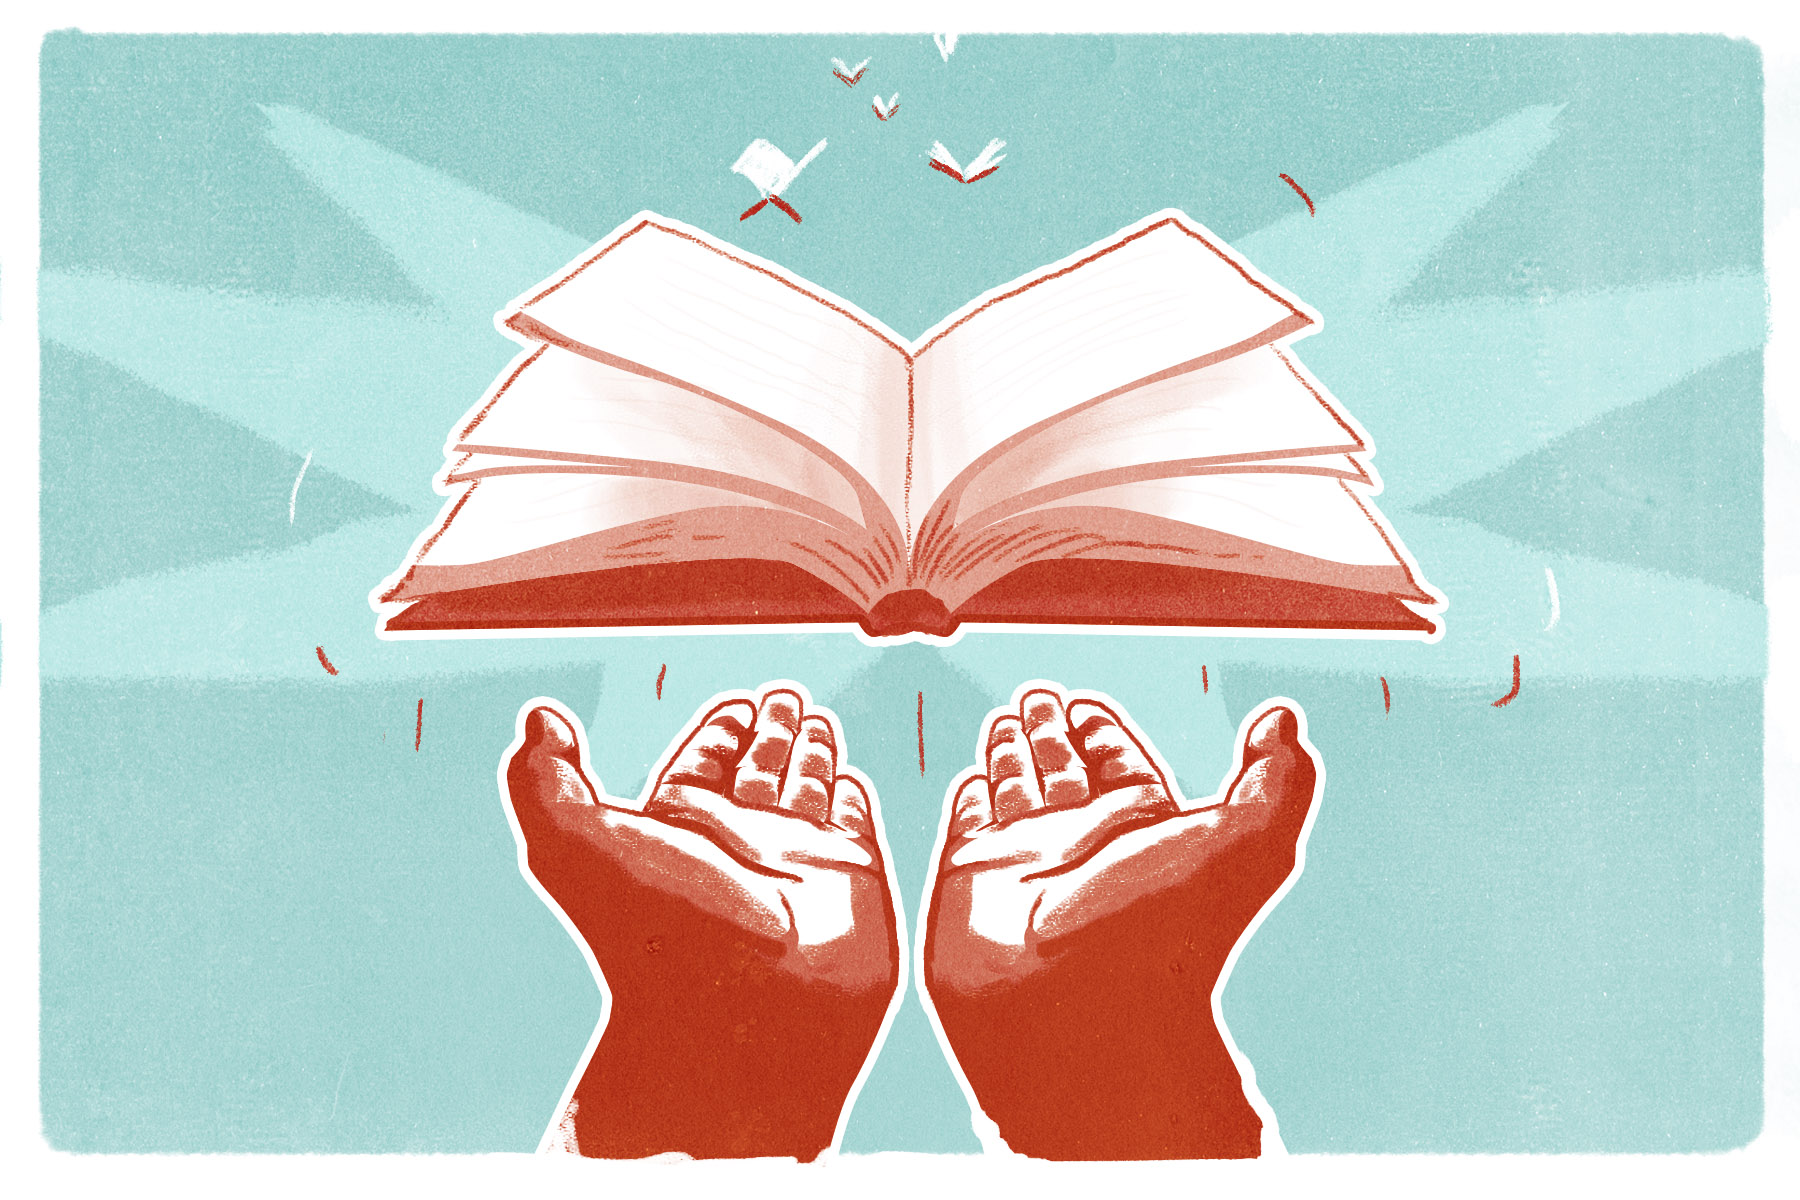 An illustration of a pair of hands setting a book free to fly away, like a bird, into the sky.